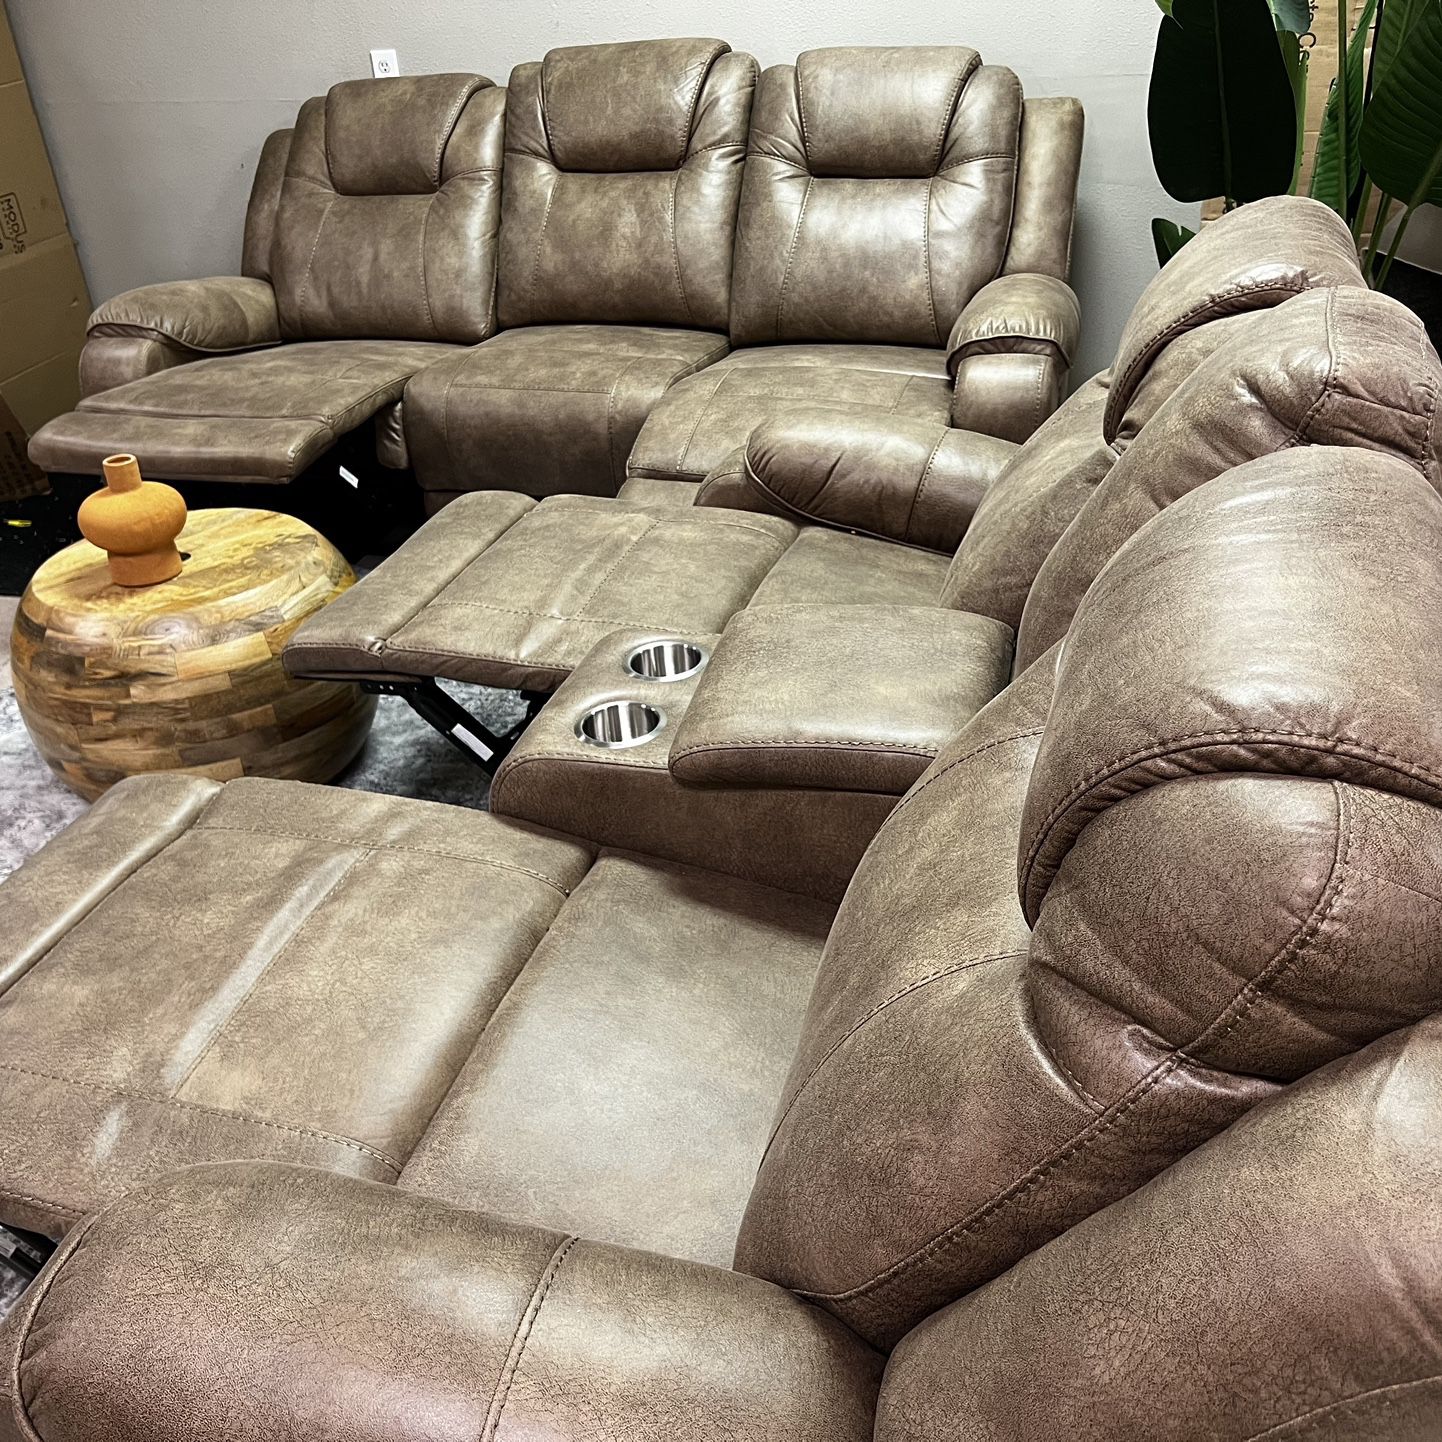 MICROSUEDE RECLINER COUCH AND LOVE SEAT WITH USB AND OUTLET PORTS , DELIVERY INCLUDED 